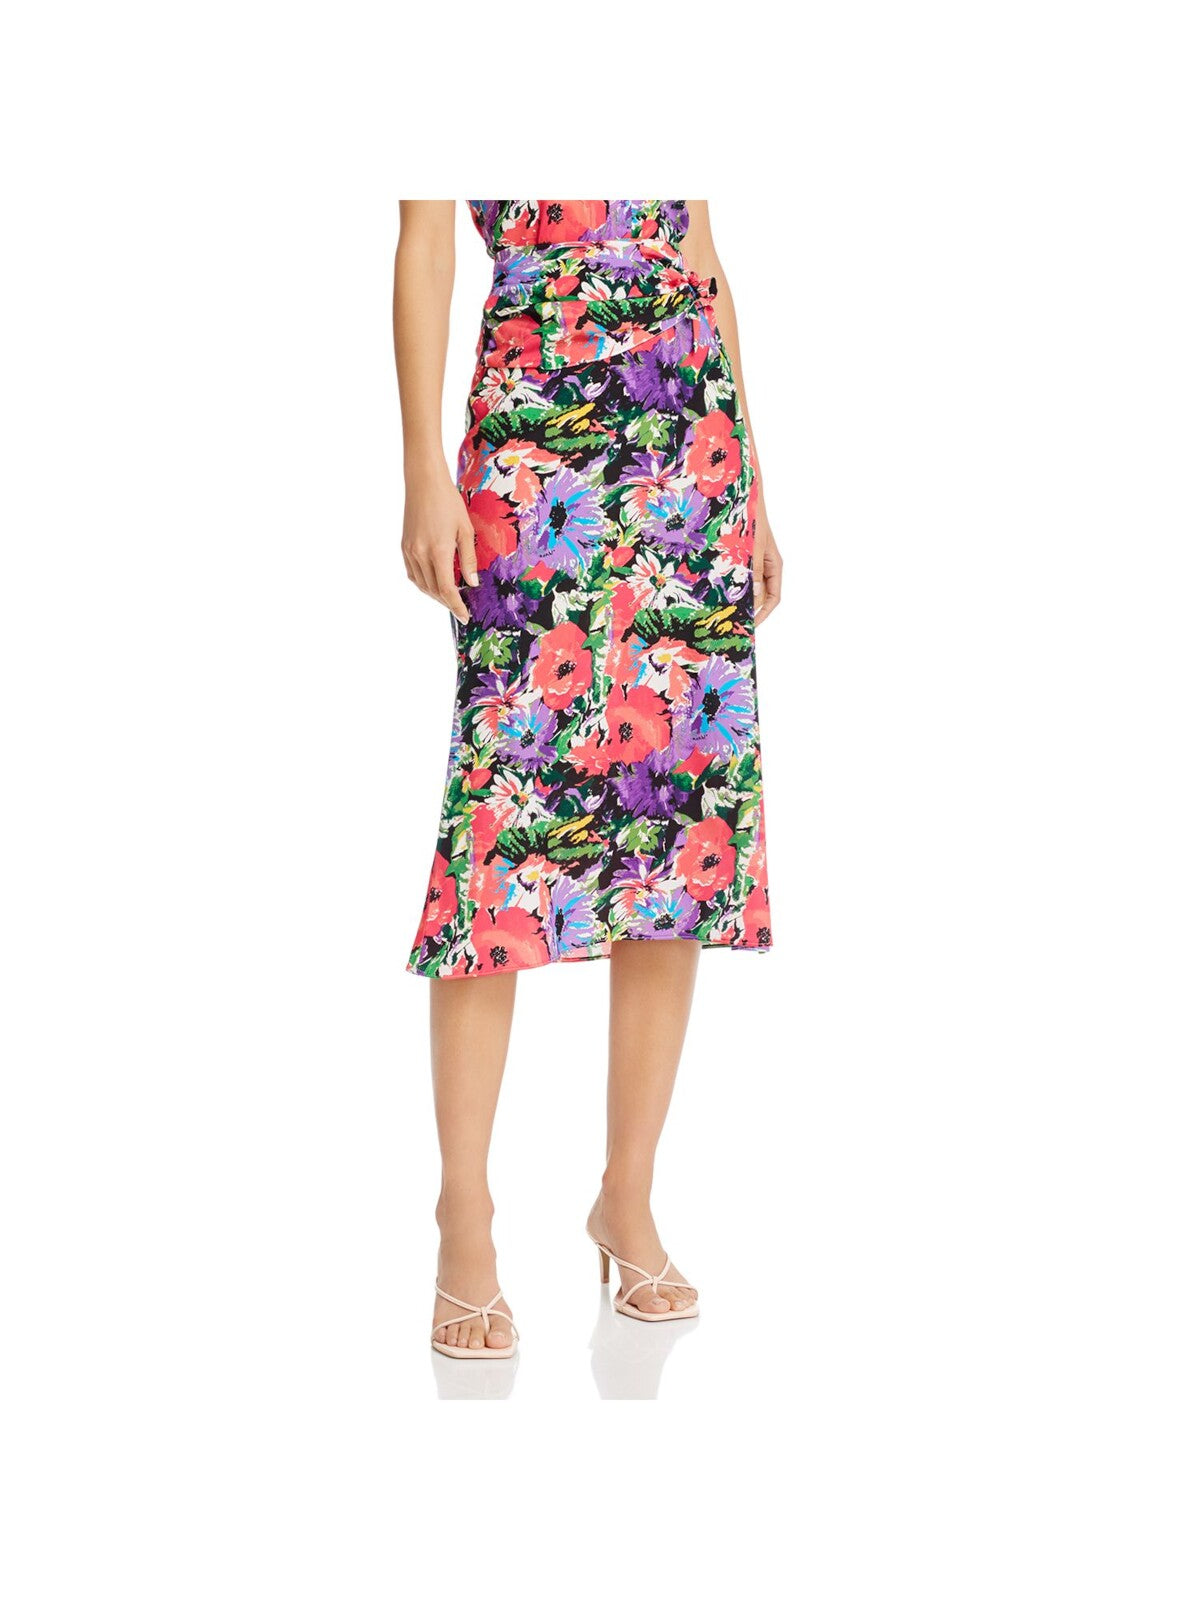 ART DEALER Womens Pink Gathered Tie Floral Midi Party A-Line Skirt S